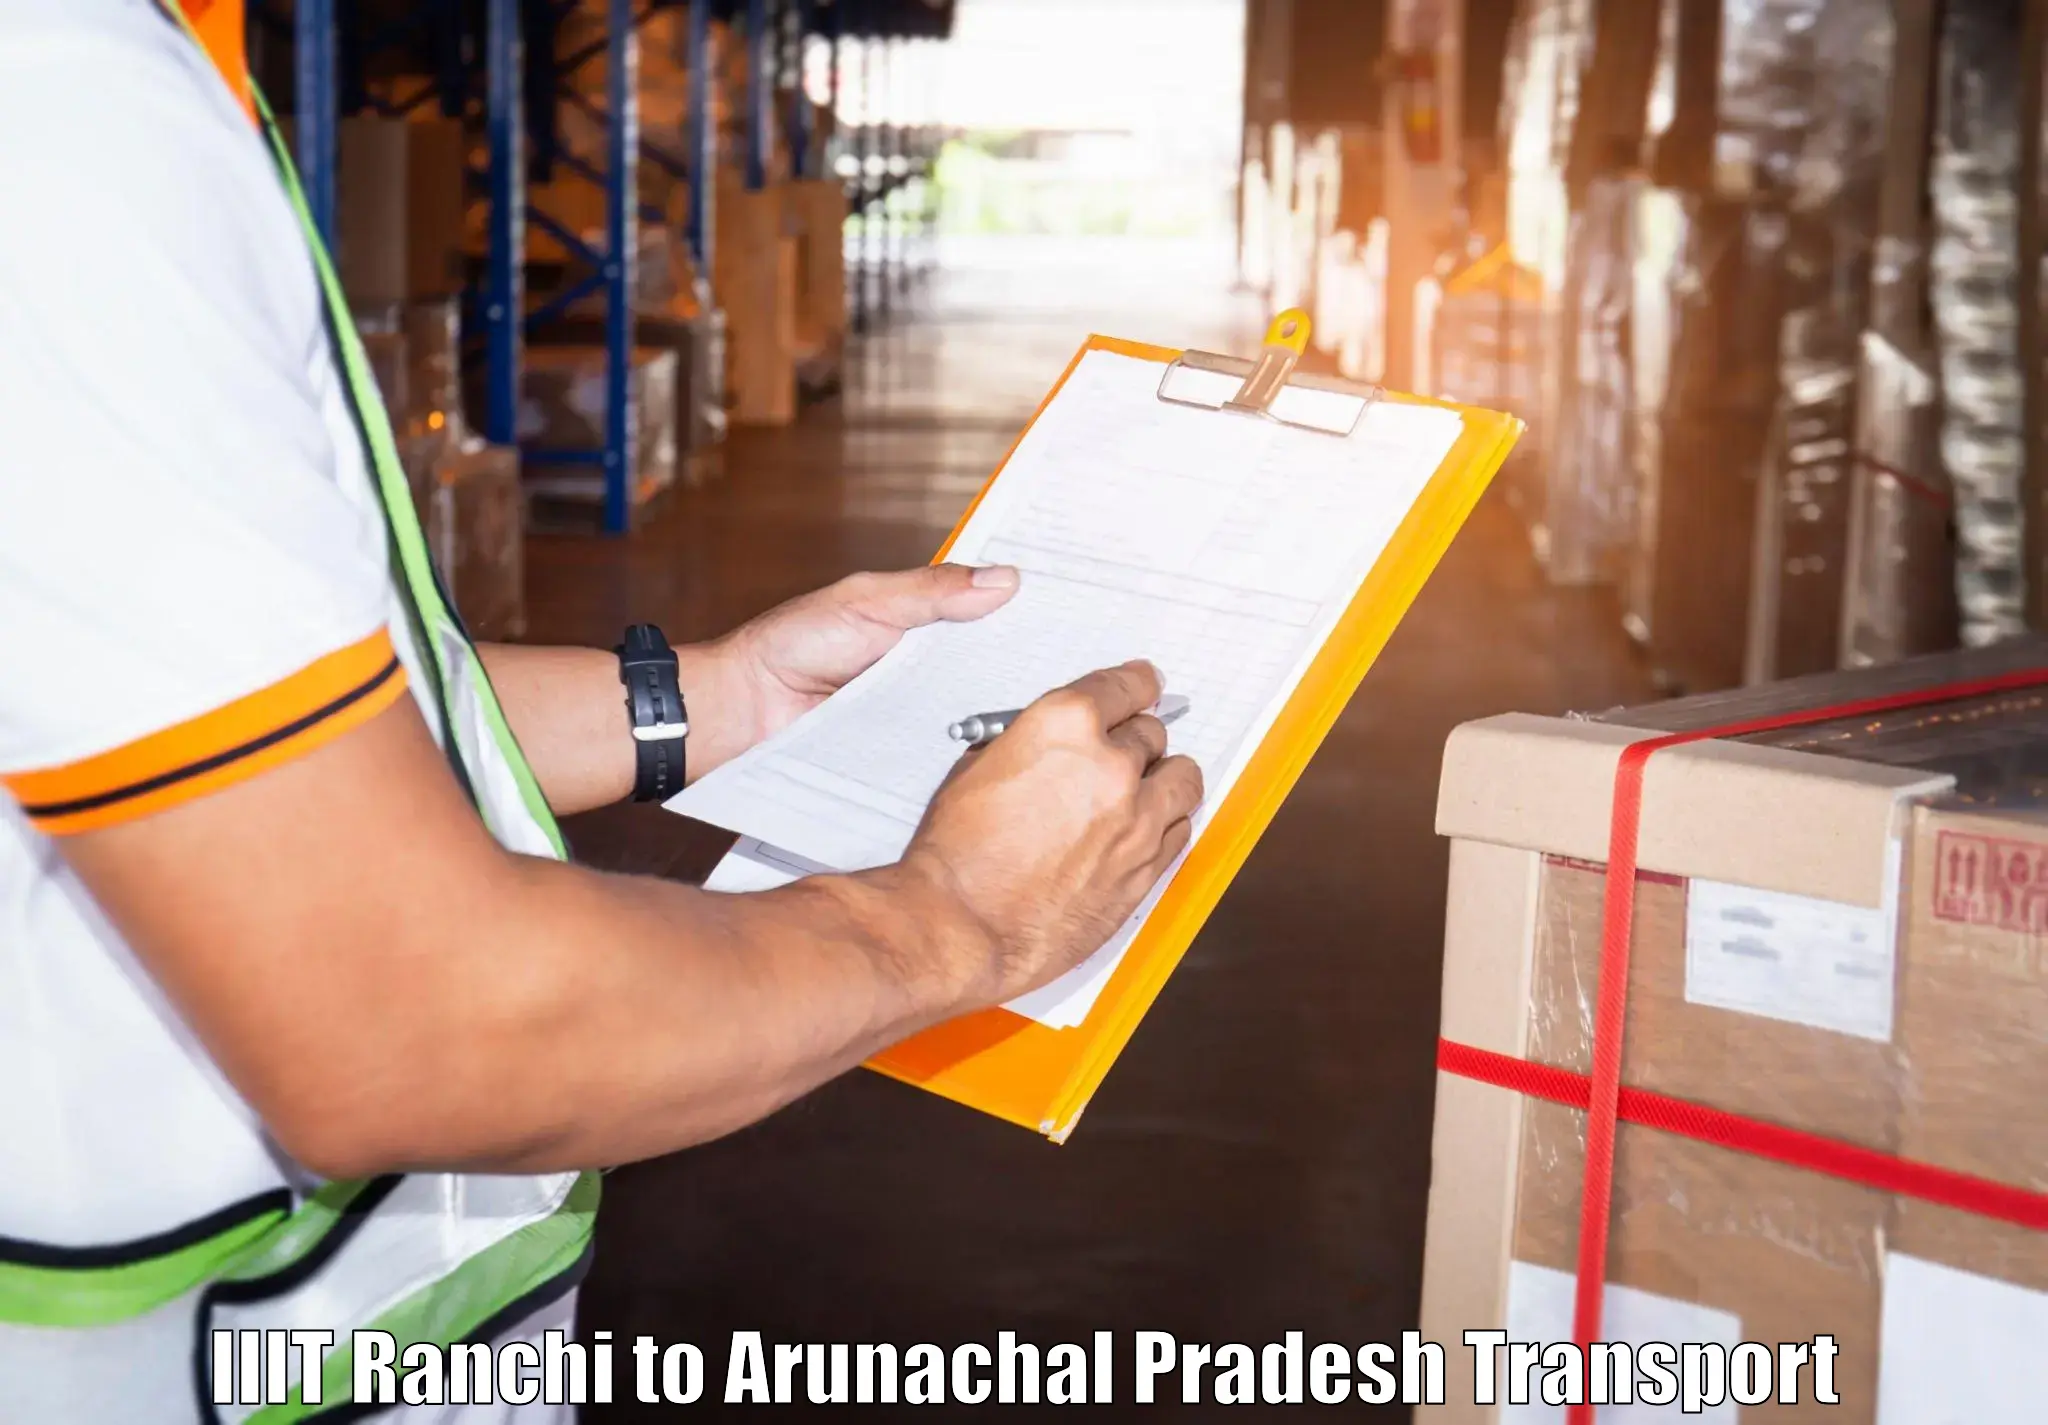 Cargo transportation services IIIT Ranchi to Changlang